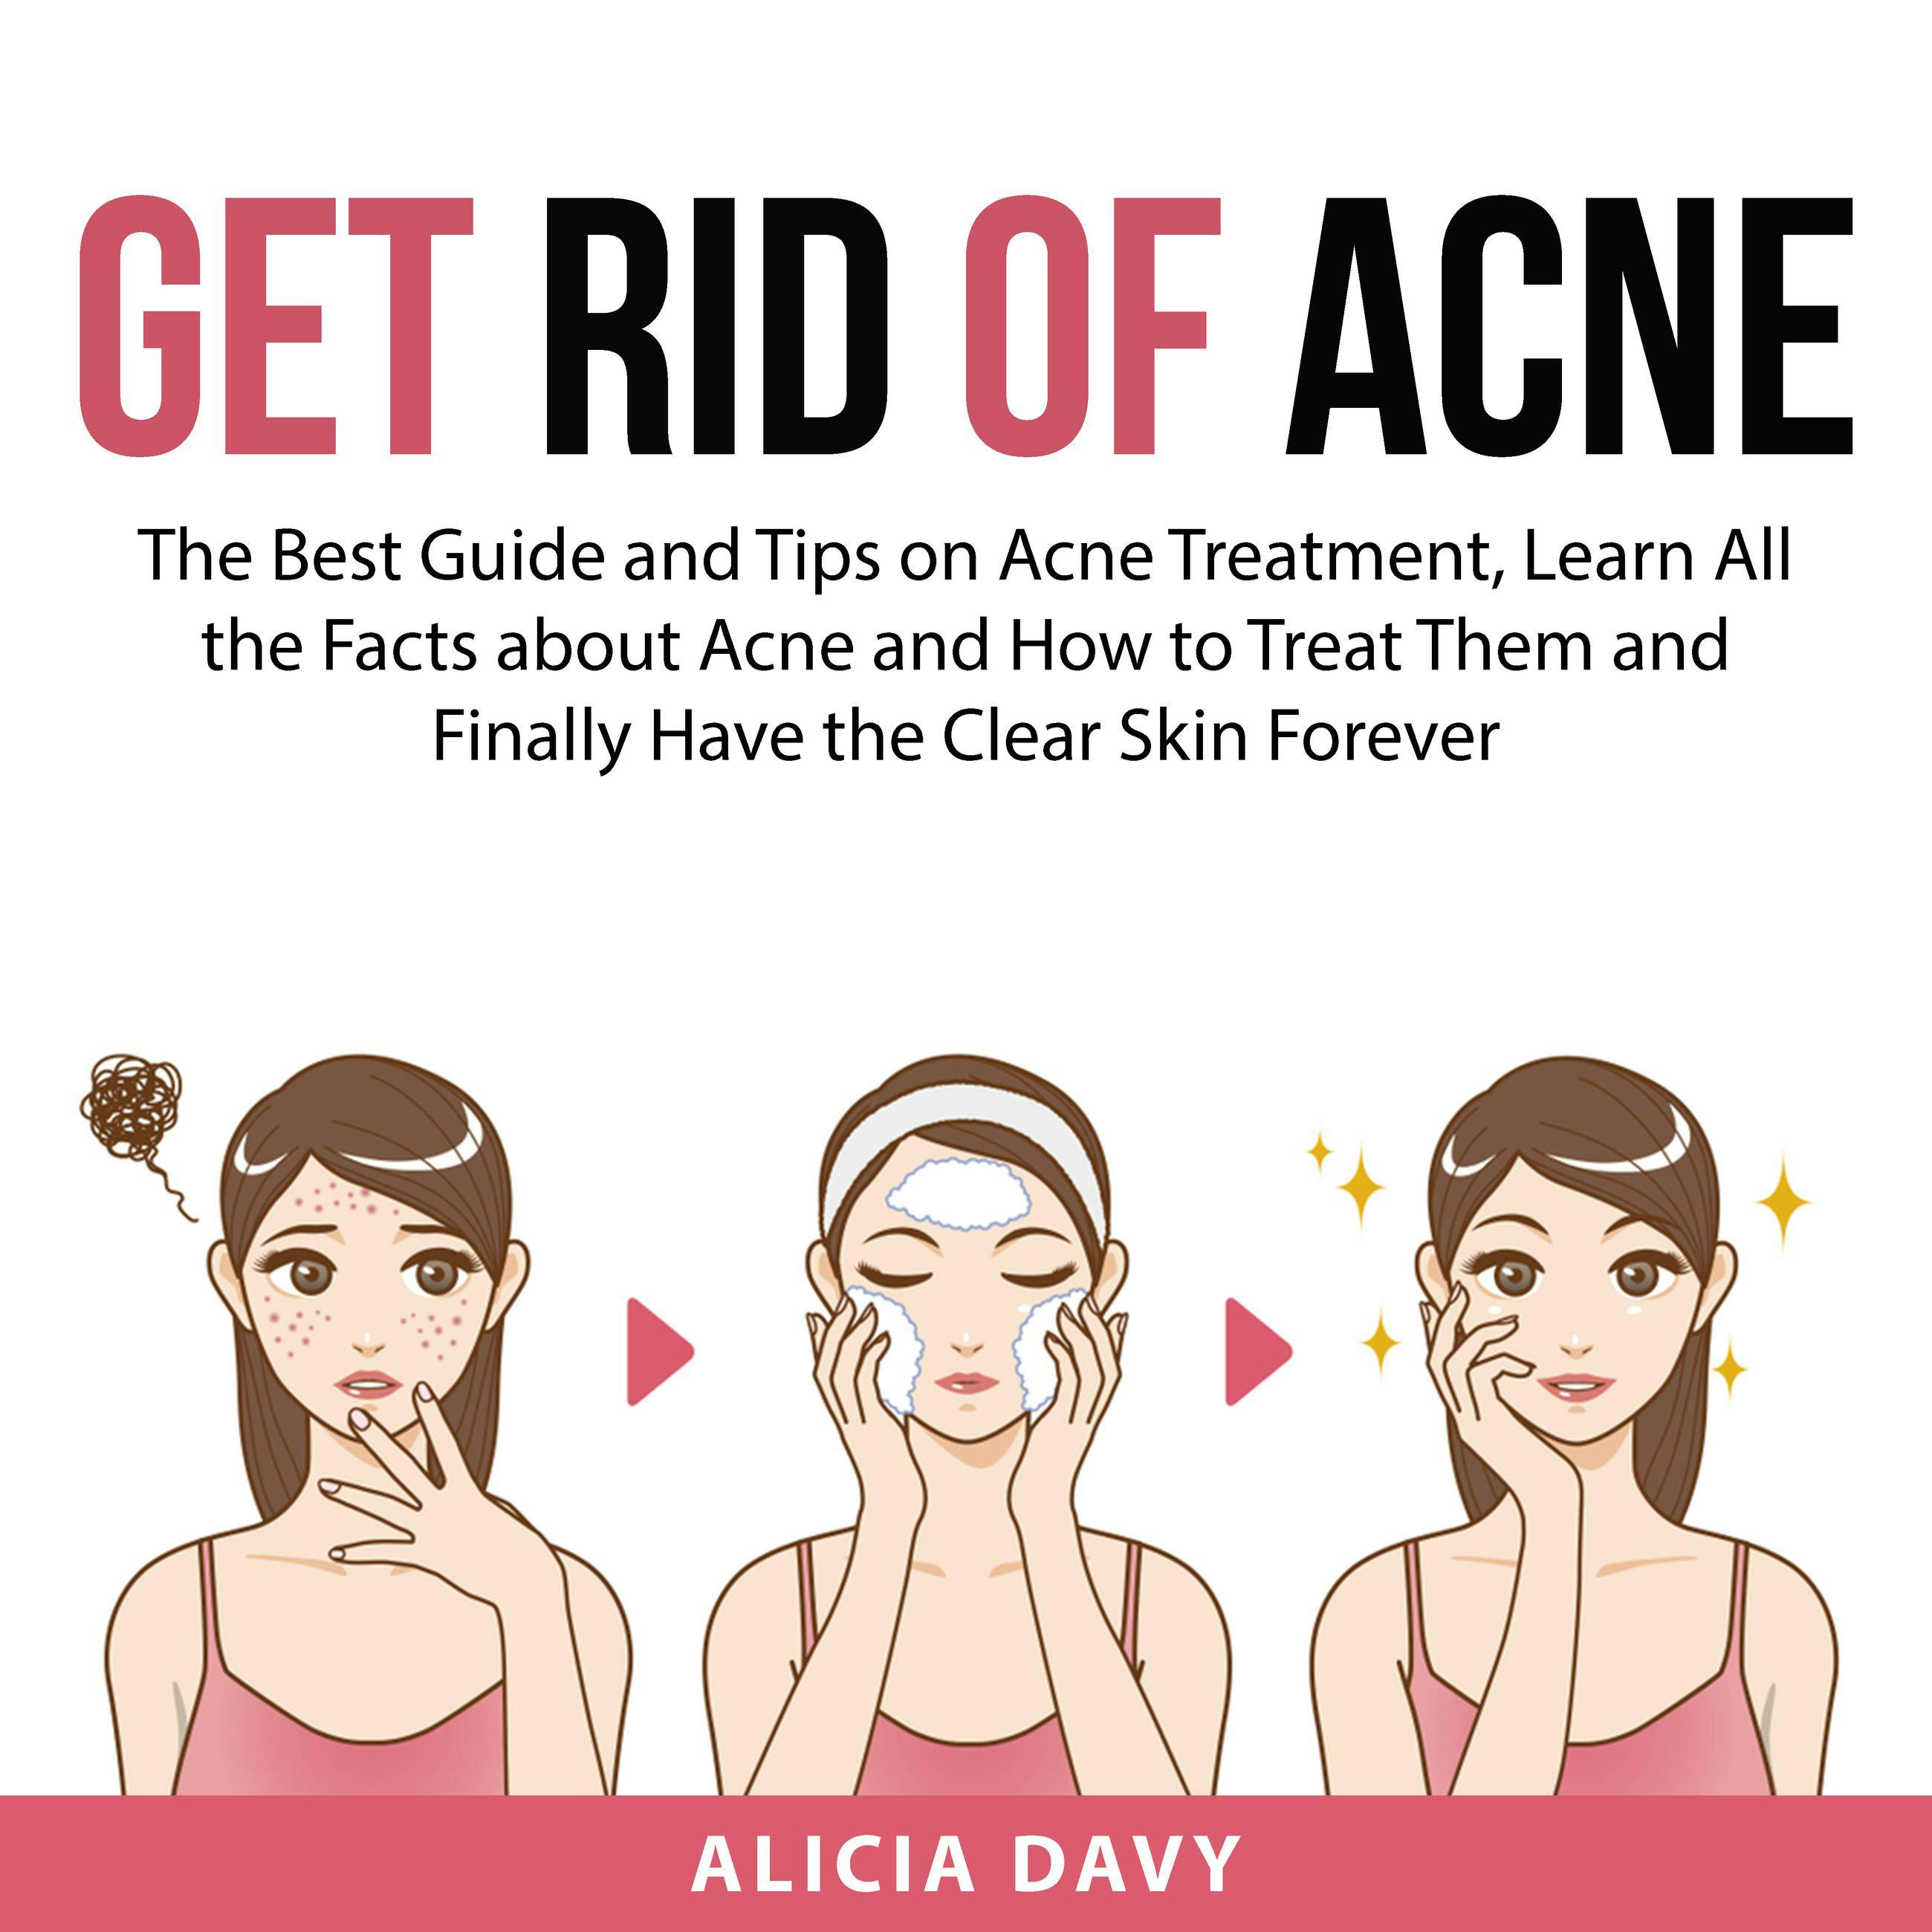 Get Rid of Acne: The Best Guide and Tips on Acne Treatment, Learn All the Facts about Acne and How to Treat Them and Finally Have the Clear Skin Forever - Alicia Davy